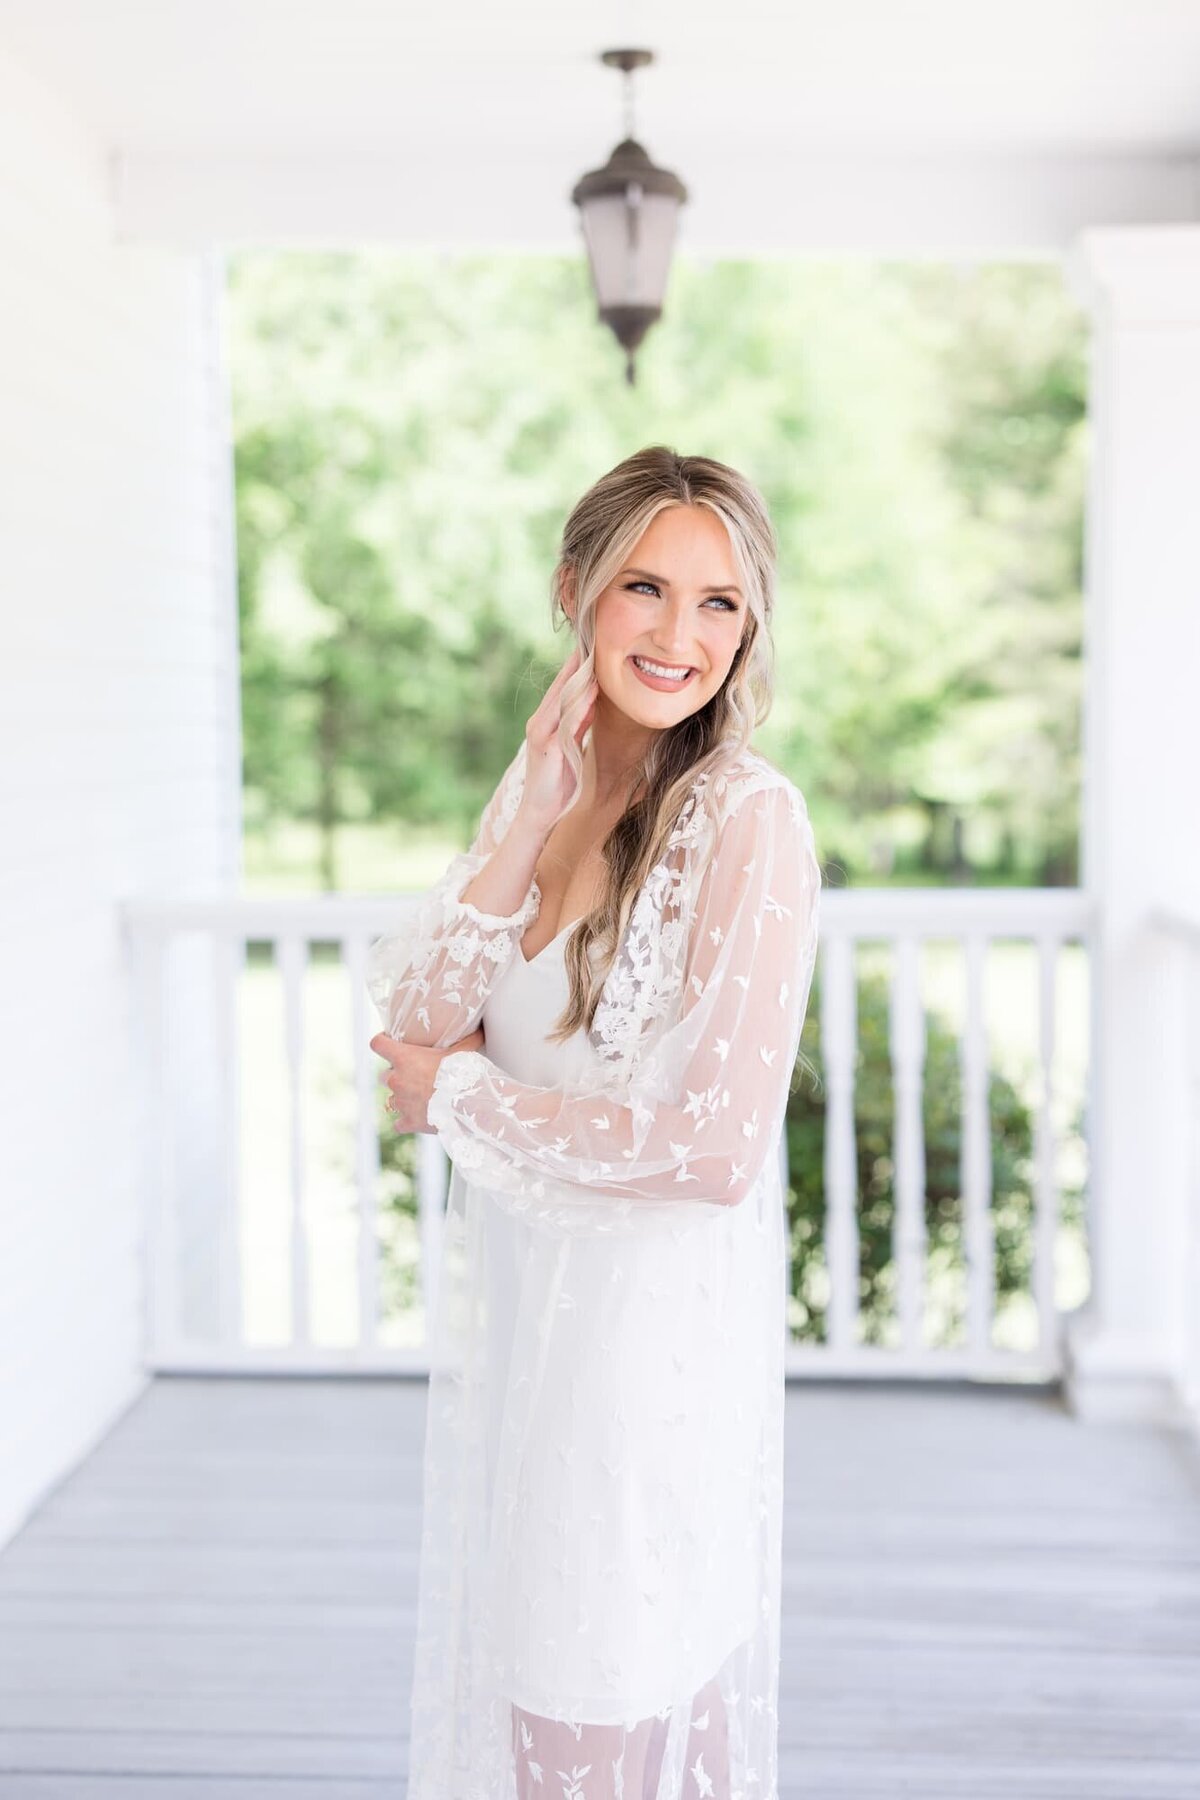 Katie and Alec Wedding Photography Wedding Videography Birmingham, Alabama Husband and Wife Team Photo Video Weddings Engagement Engagements Light Airy Focused on Marriage  Samantha + Connor's Sonne_VSn5